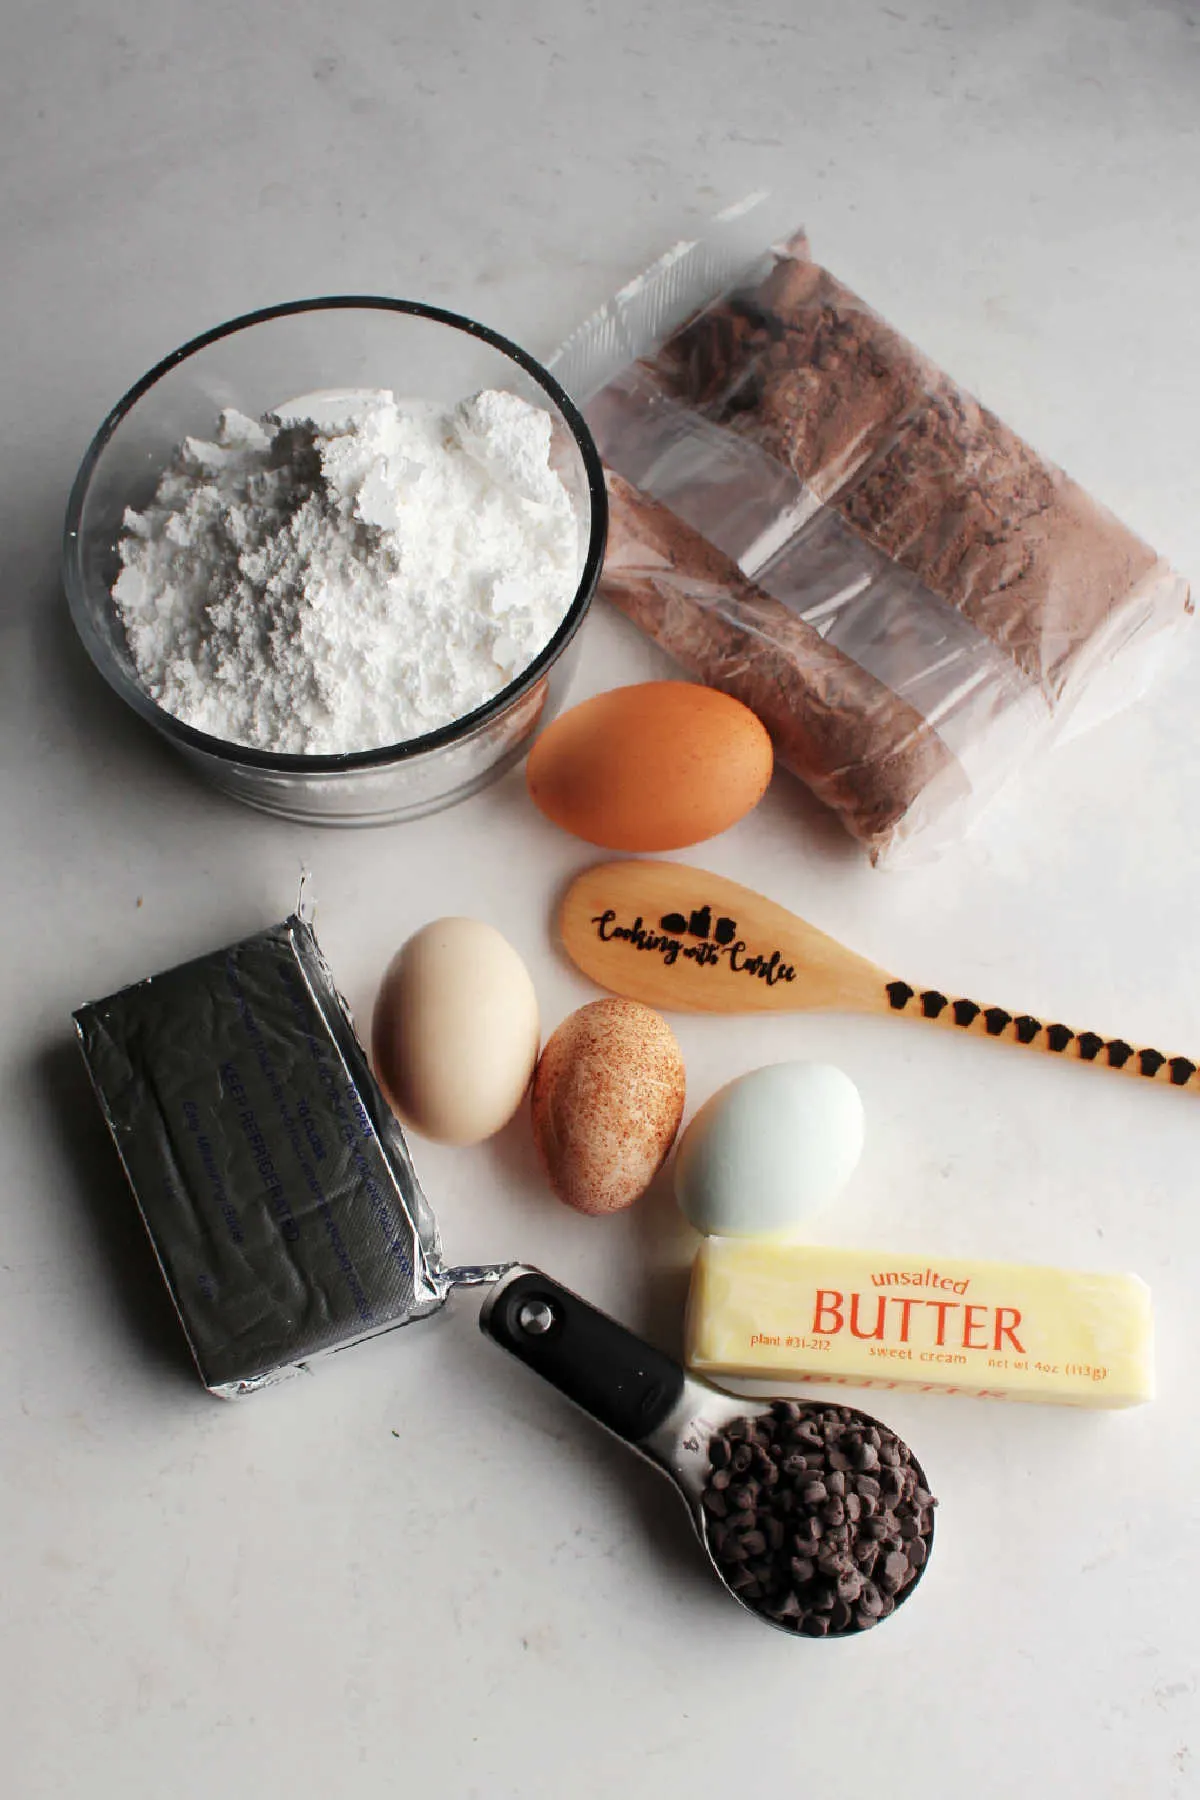 Ingredients ready to be made into chocolate gooey butter cake.